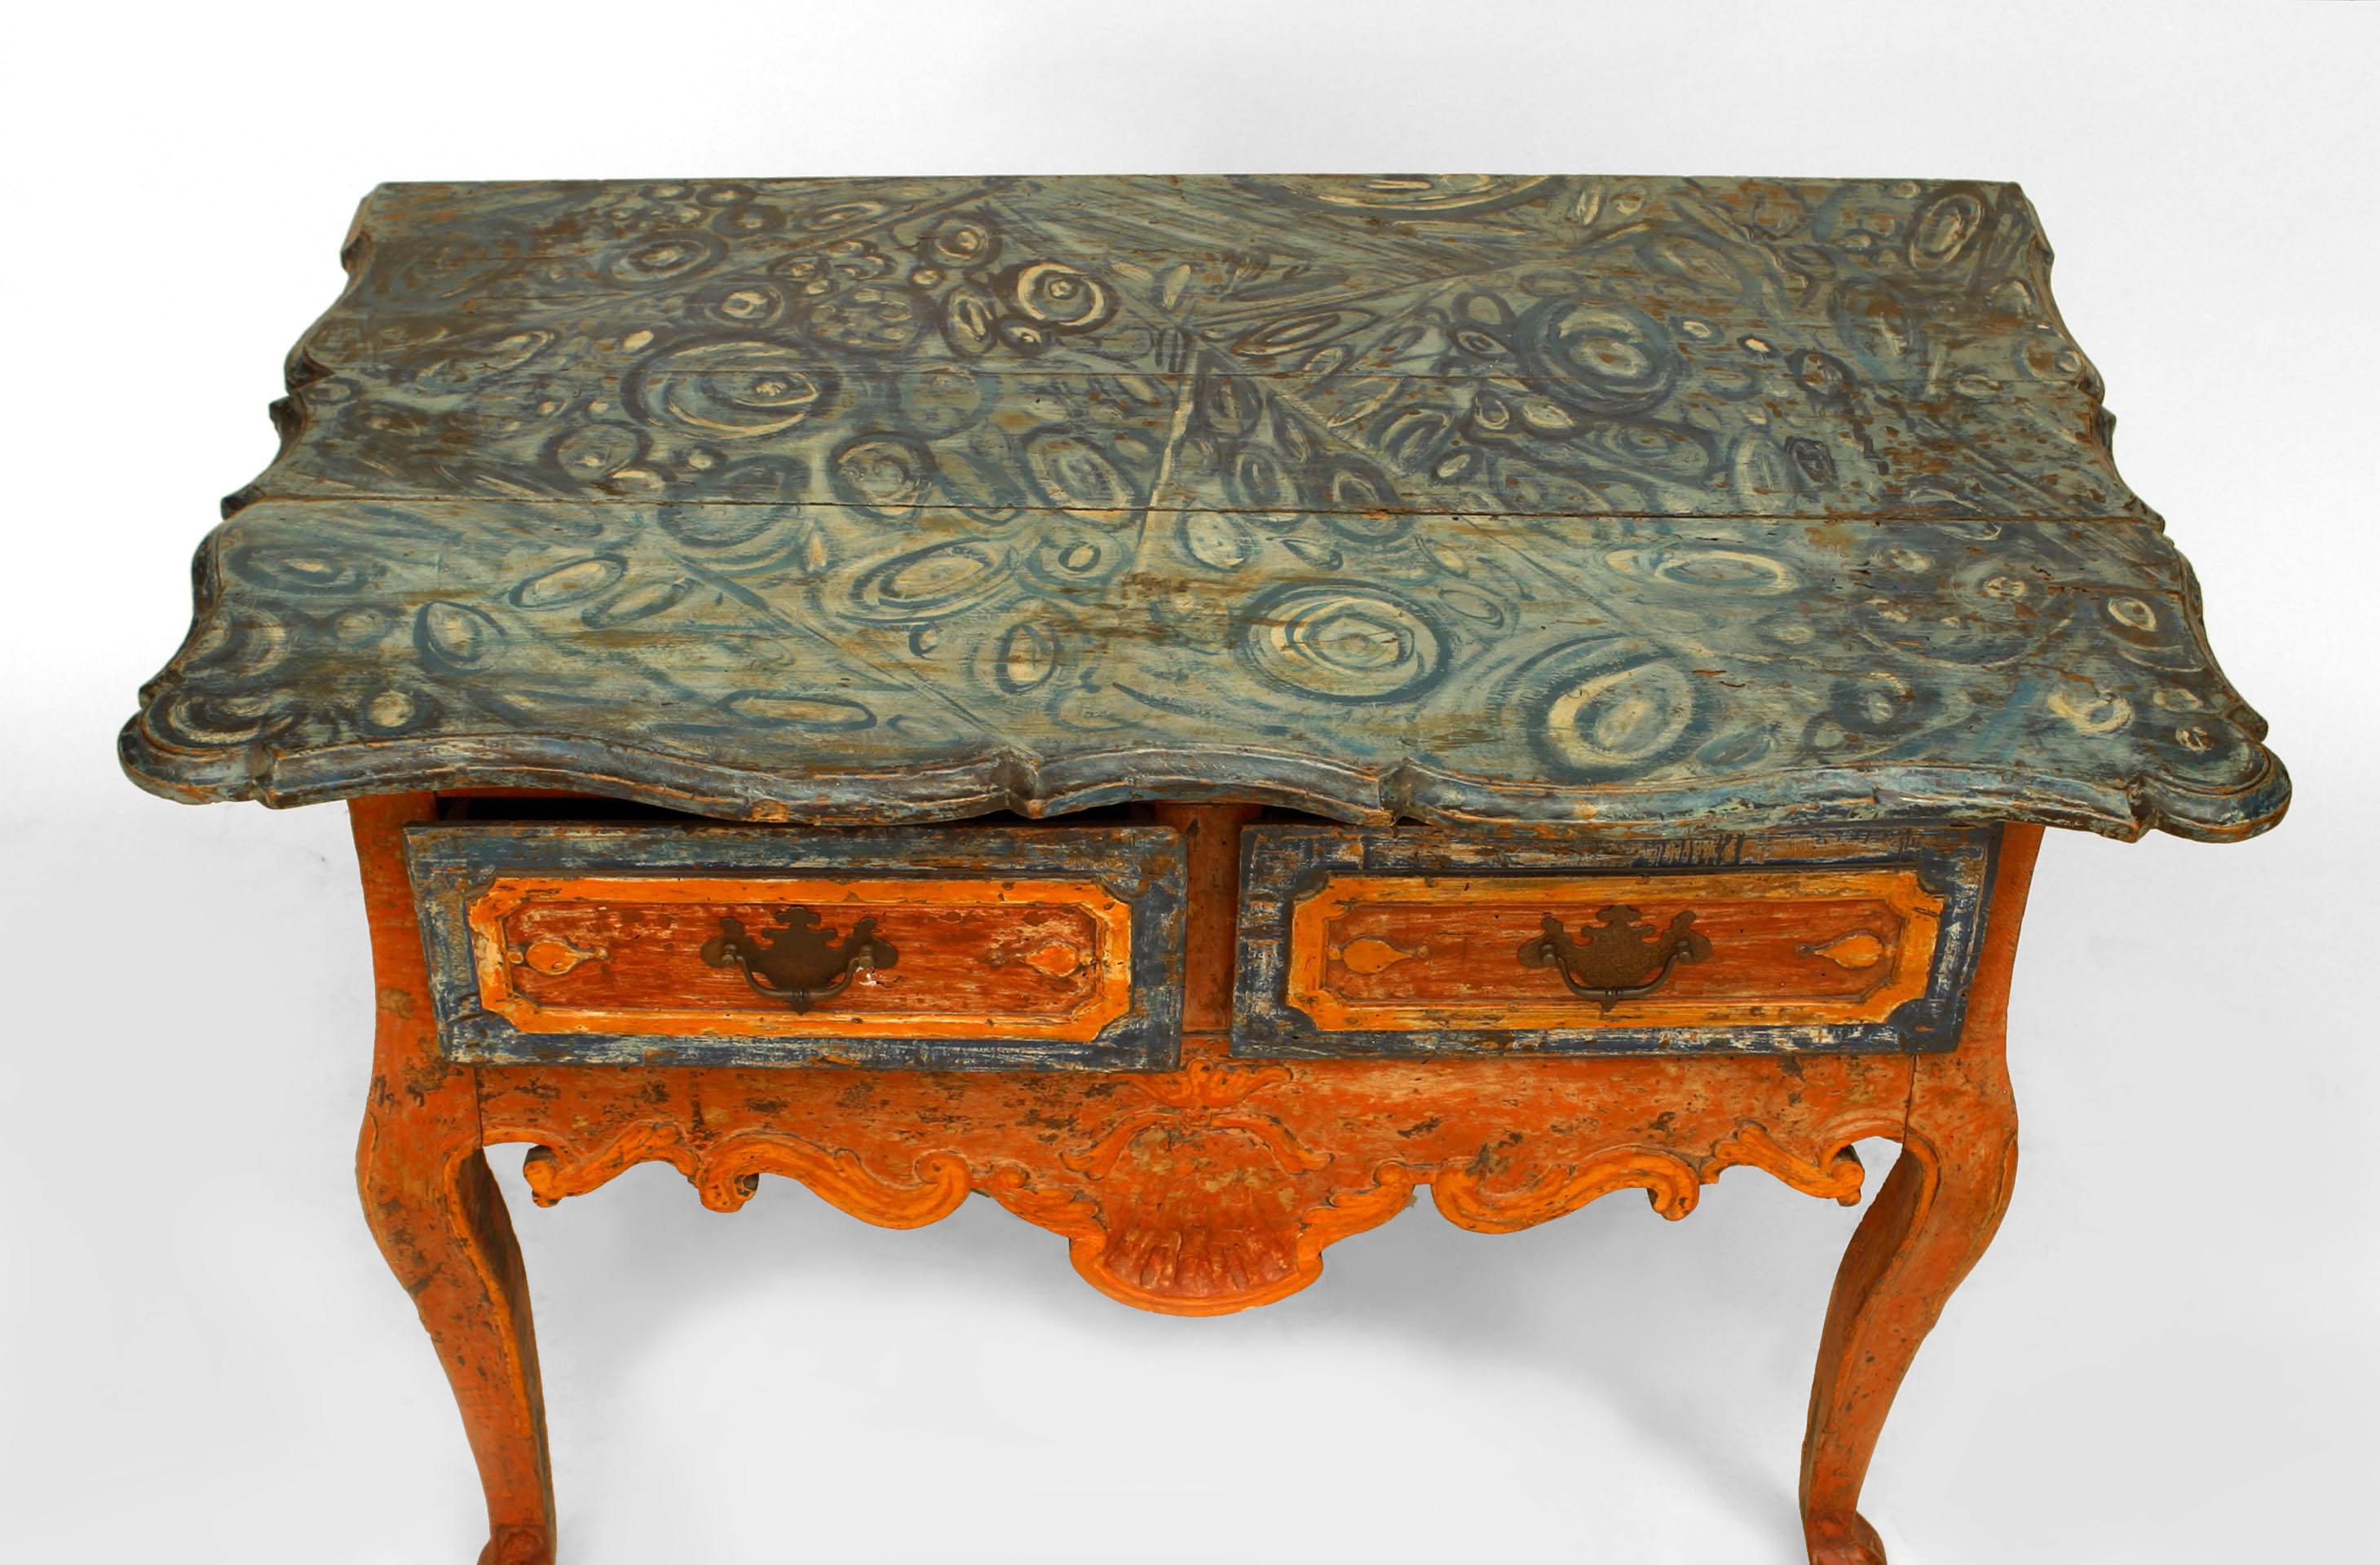 Rustic Continental ‘Portuguese’ 18th Century Orange and Blue Painted Commode 1